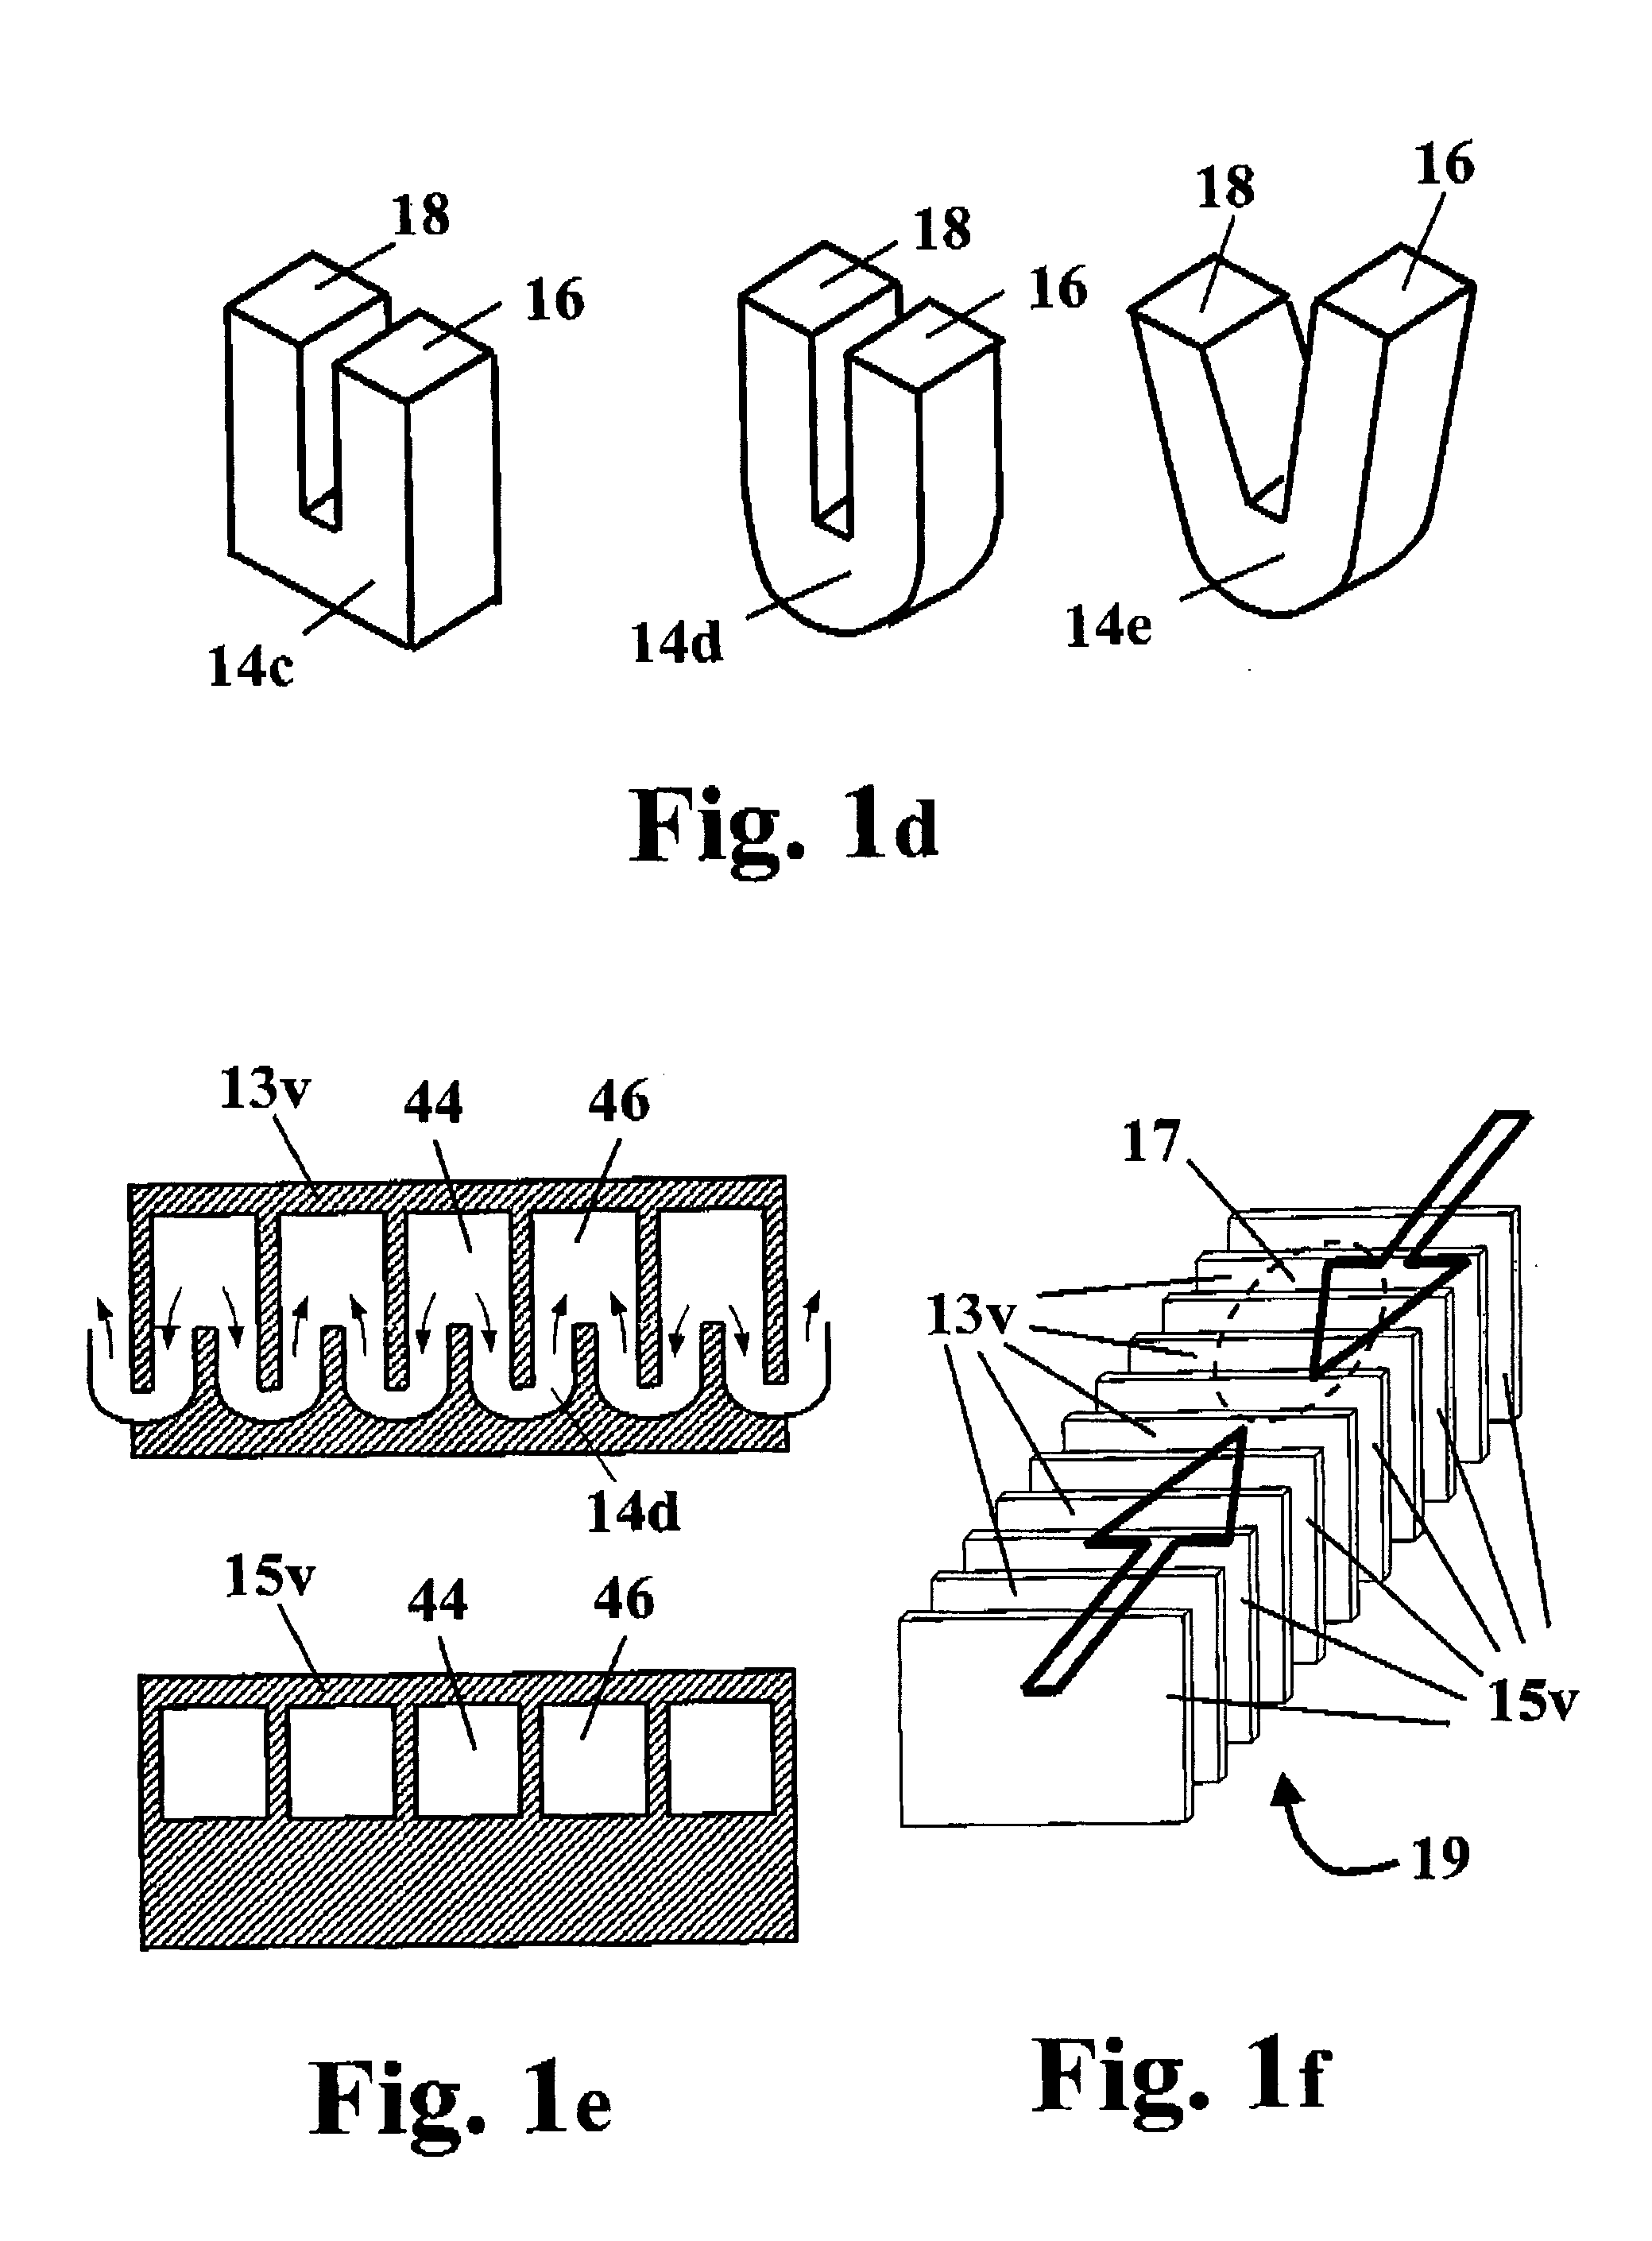 Heat-exchanger device and cooling system